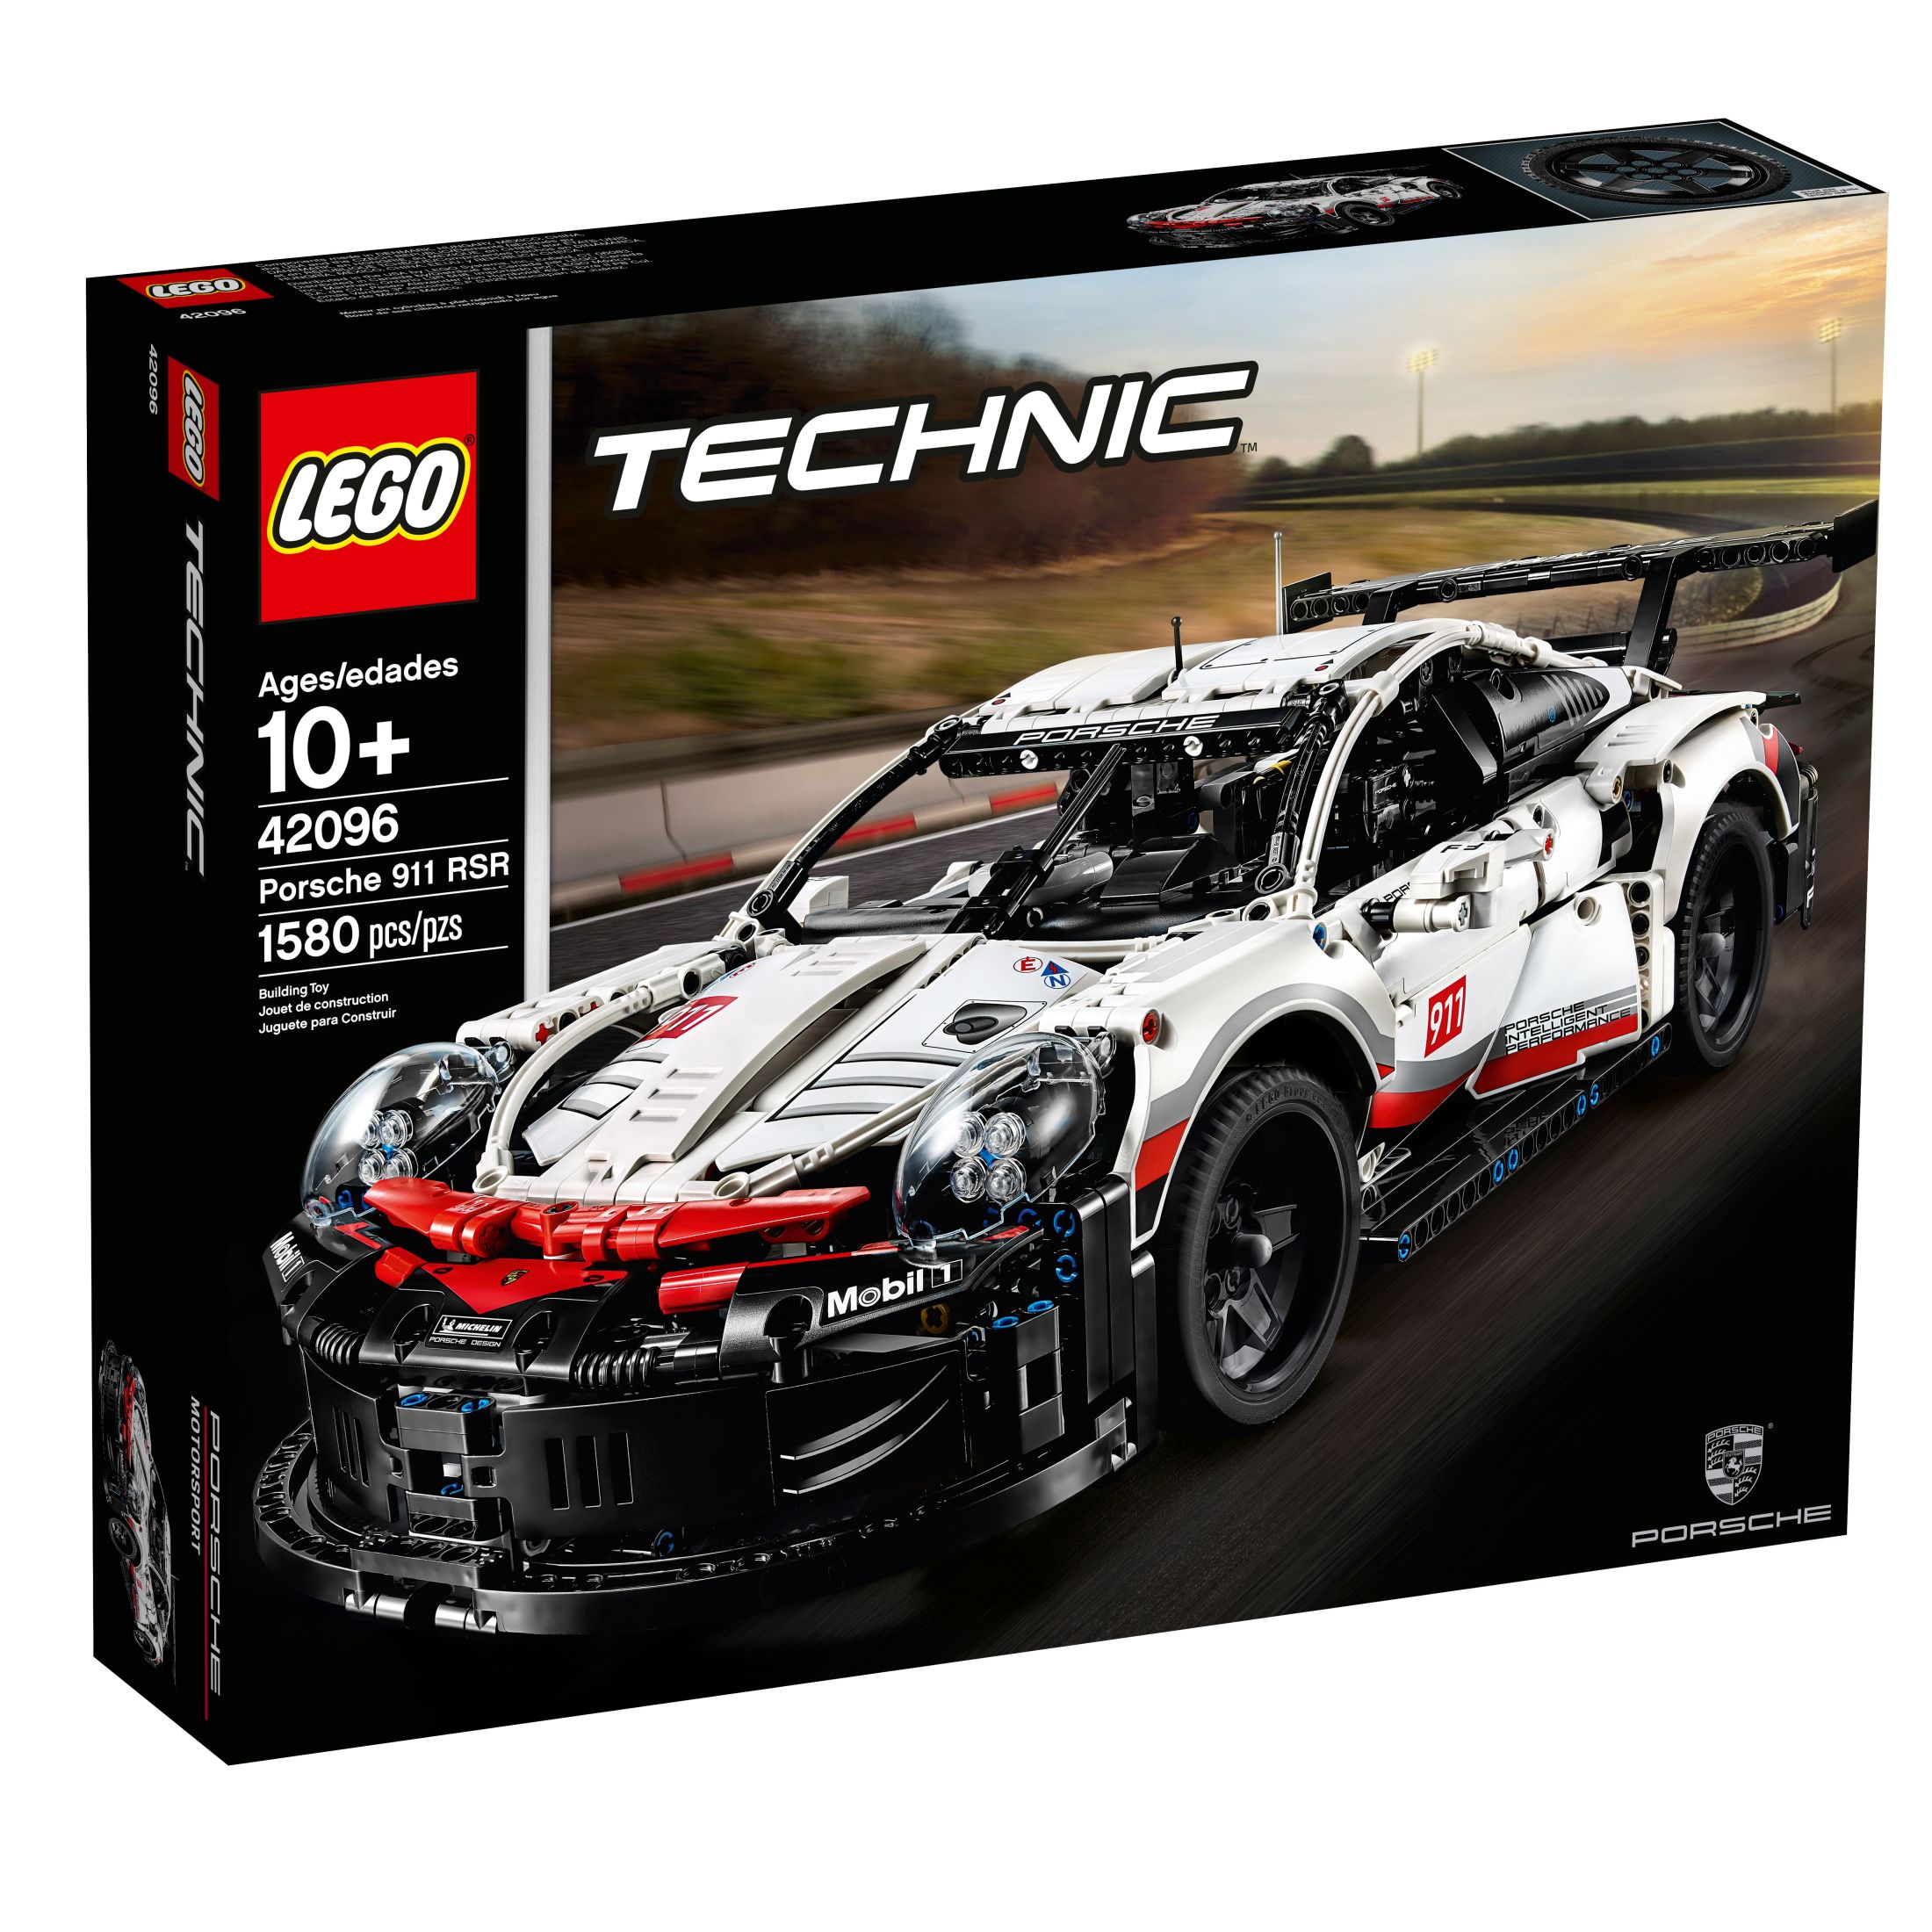 LEGO Technic Porsche 911 RSR Race Car Model Building Kit 42096, Advanced Replica, Exclusive Collectible Set, Gift for Kids, Boys & Girls - image 4 of 9